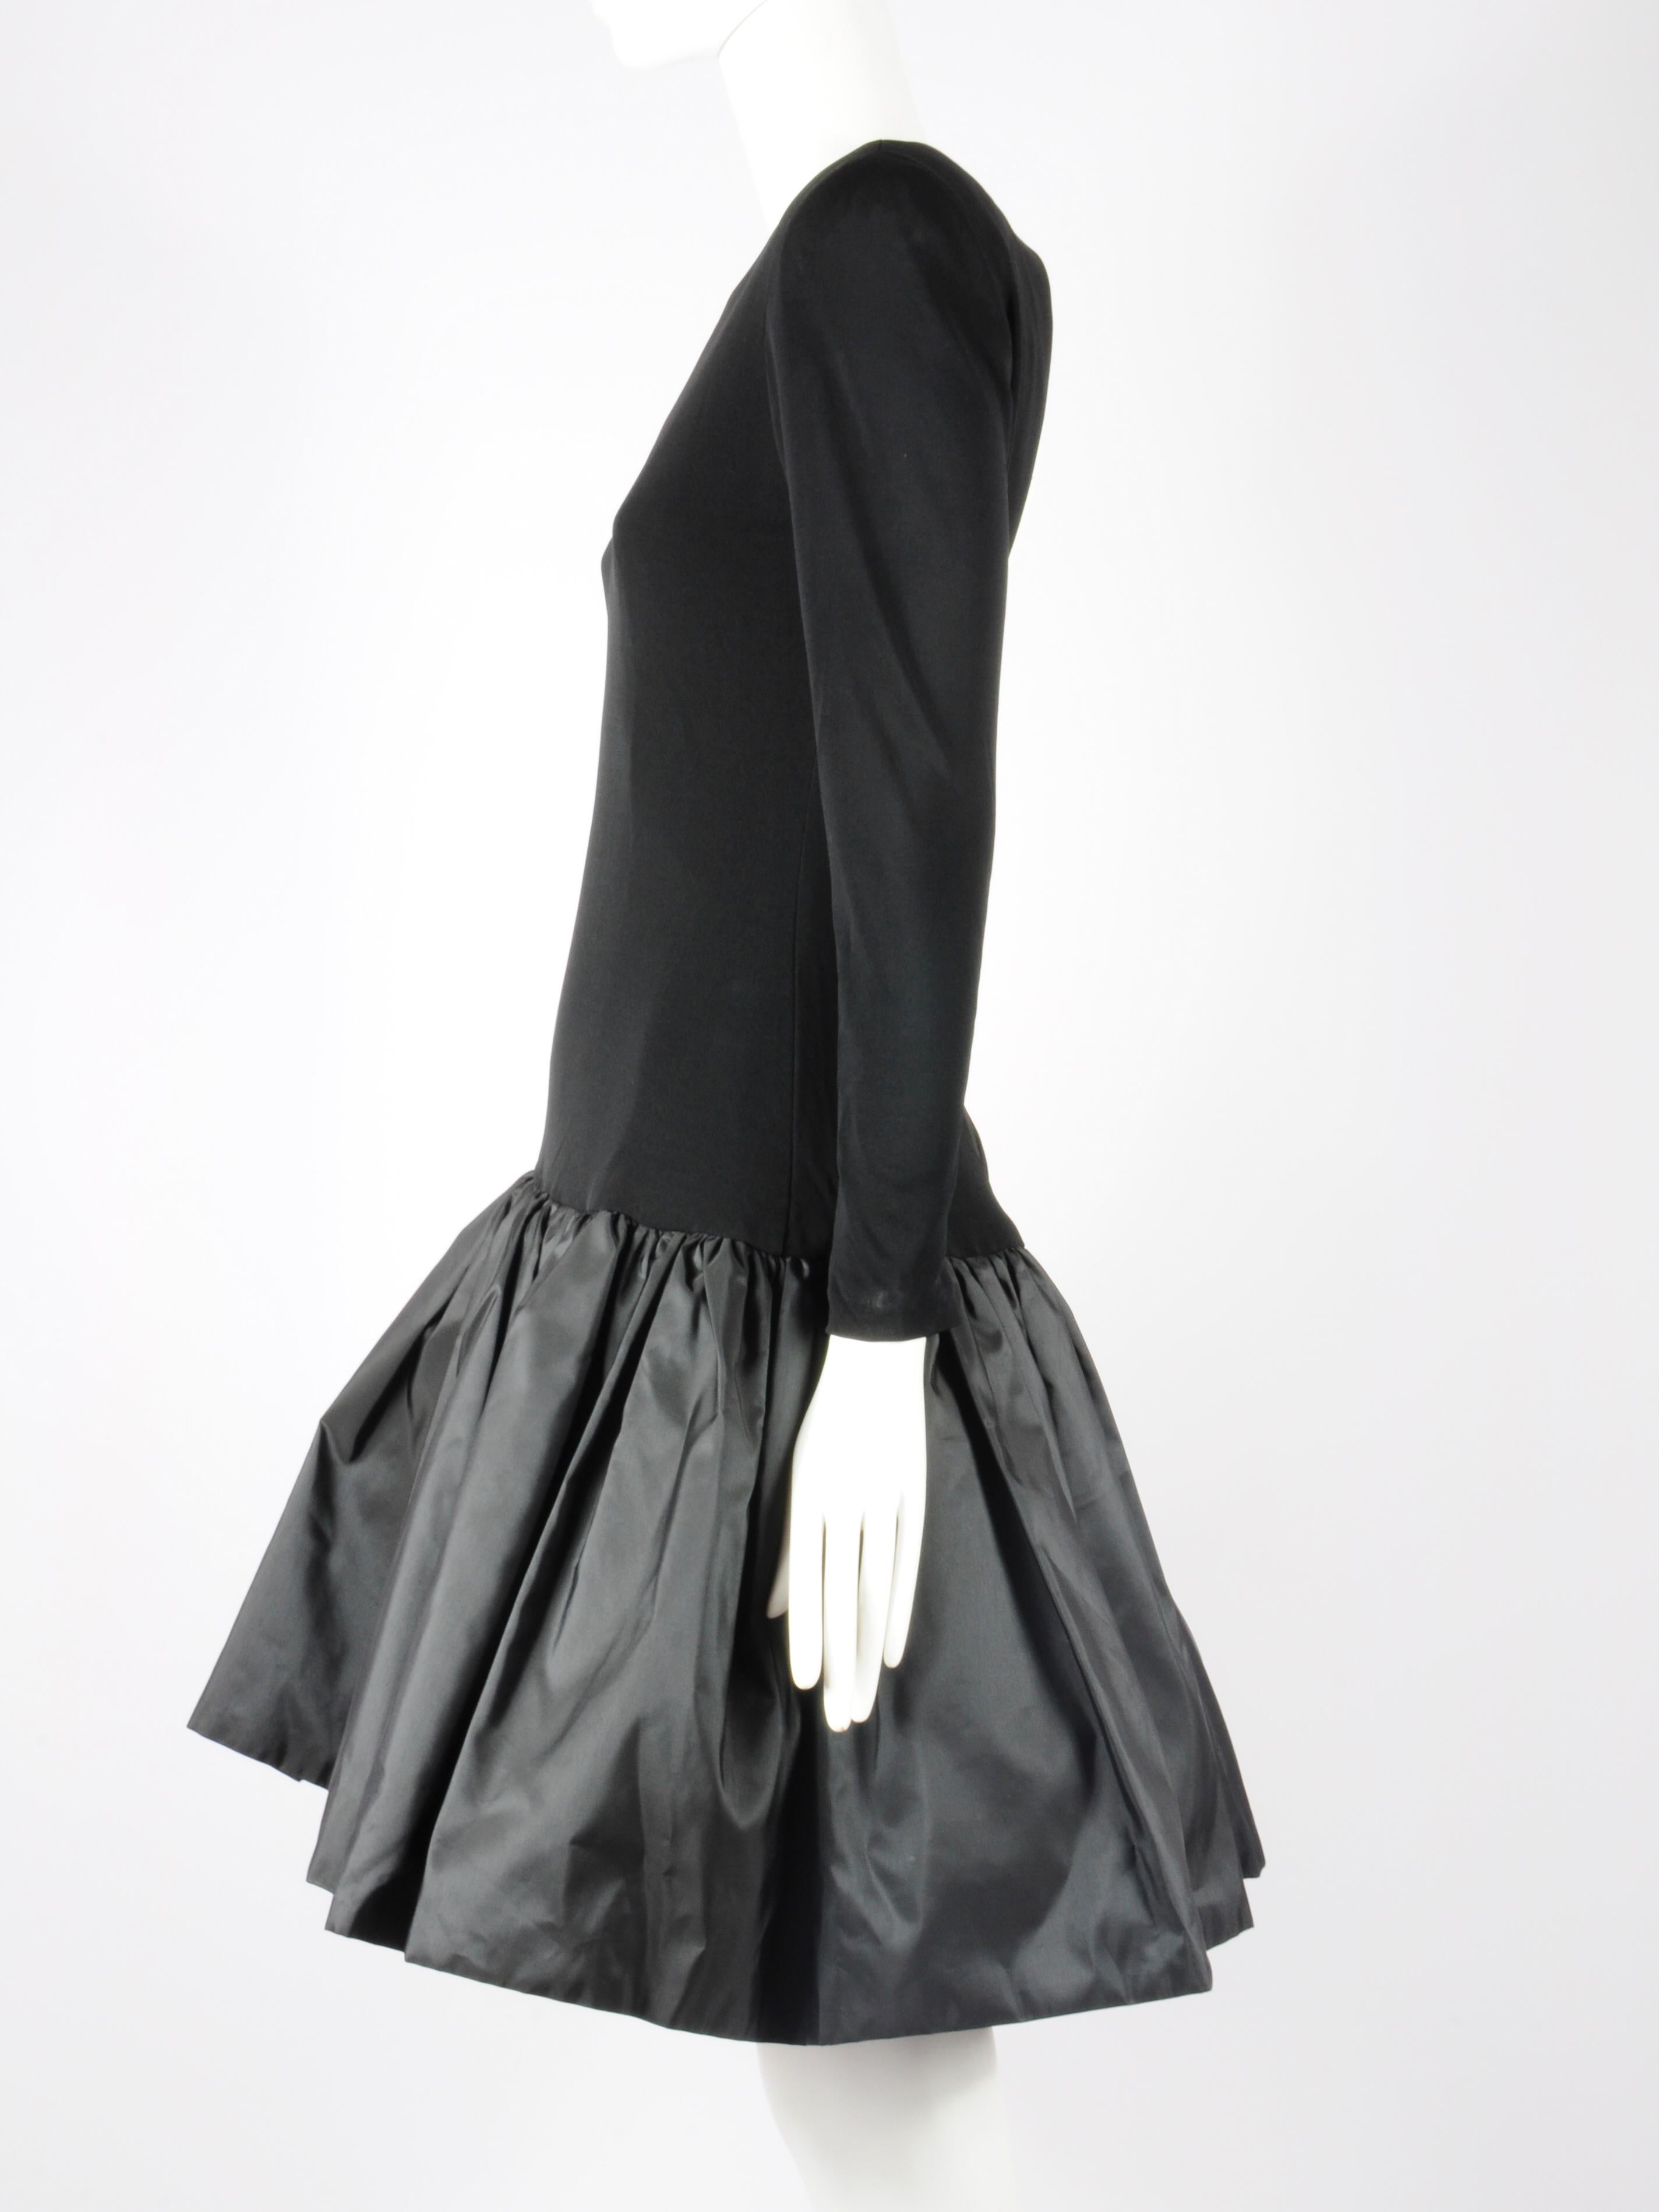 Victor Costa for Bergdorf Goodman Open Back Cocktail Dress with Tule Skirt 1980s For Sale 3